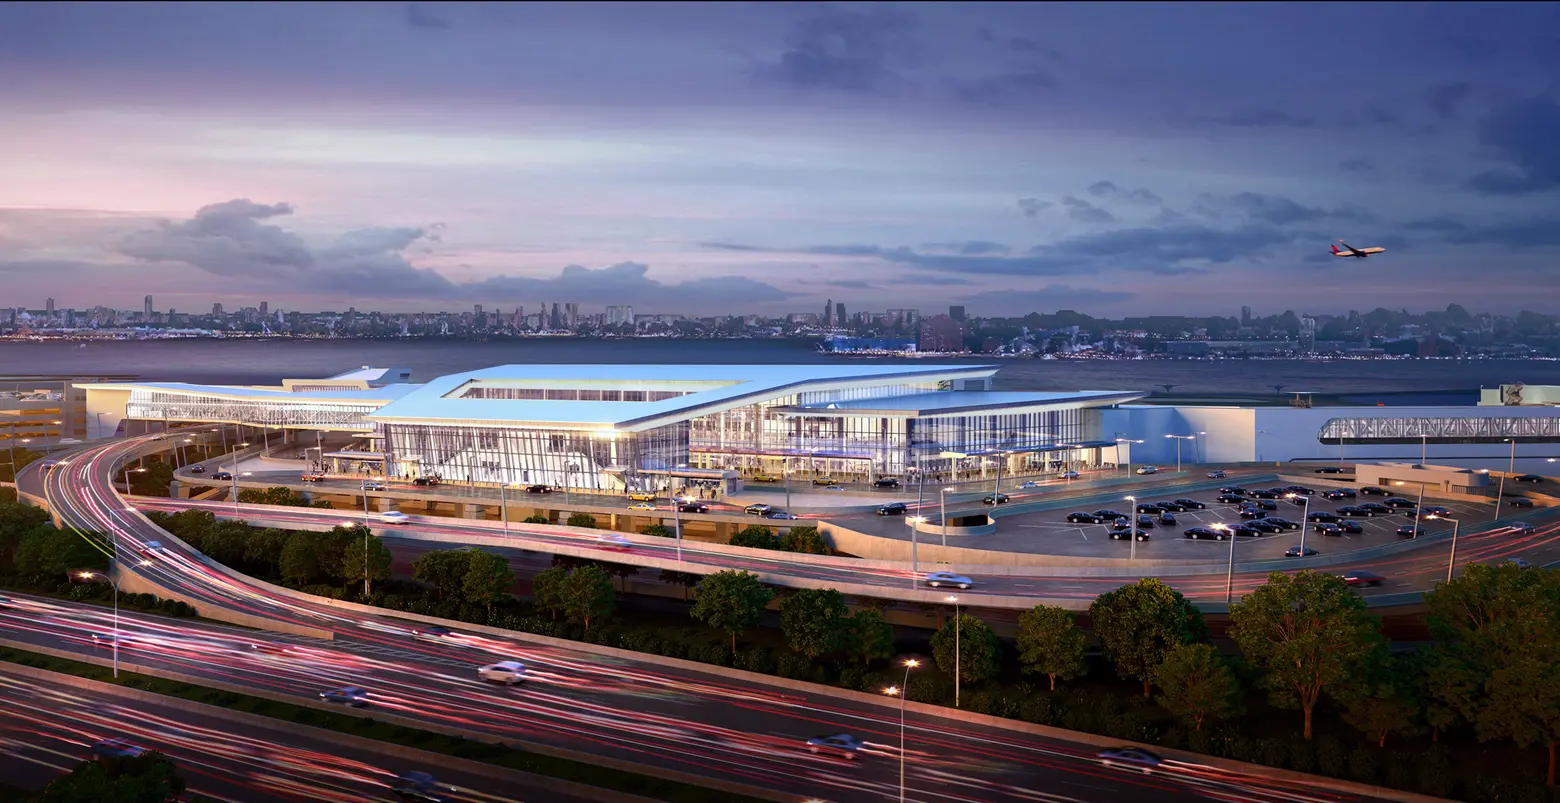 Cuomo unveils new looks for next phase of $8B LaGuardia Airport overhaul